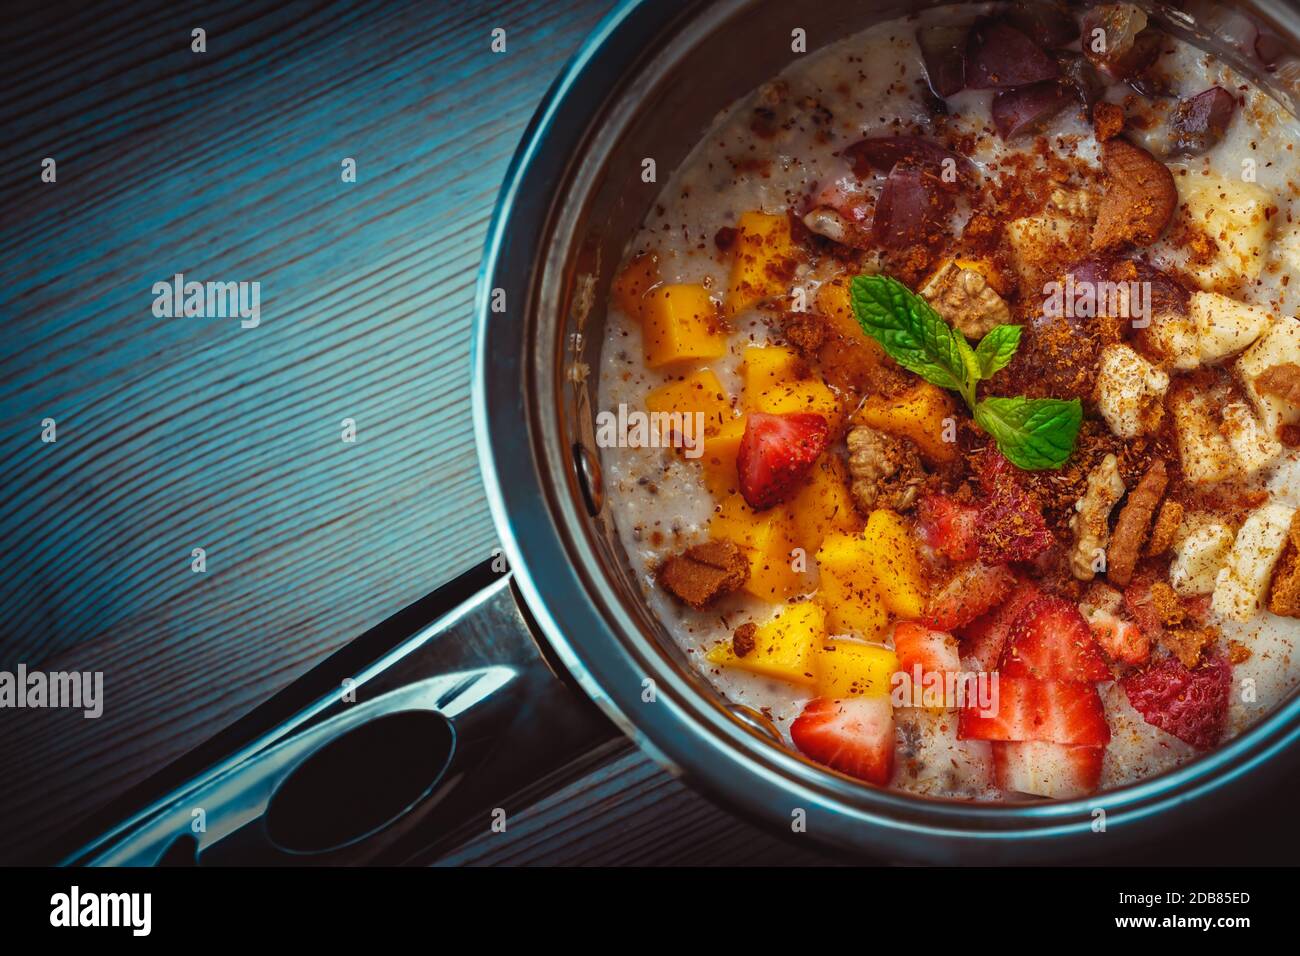 Tasty oatmeal prepared with fruits and nuts, healthy organic nutrition, tasty vegetarian food, superfood, detox and diet, local seasonal ingredients, Stock Photo